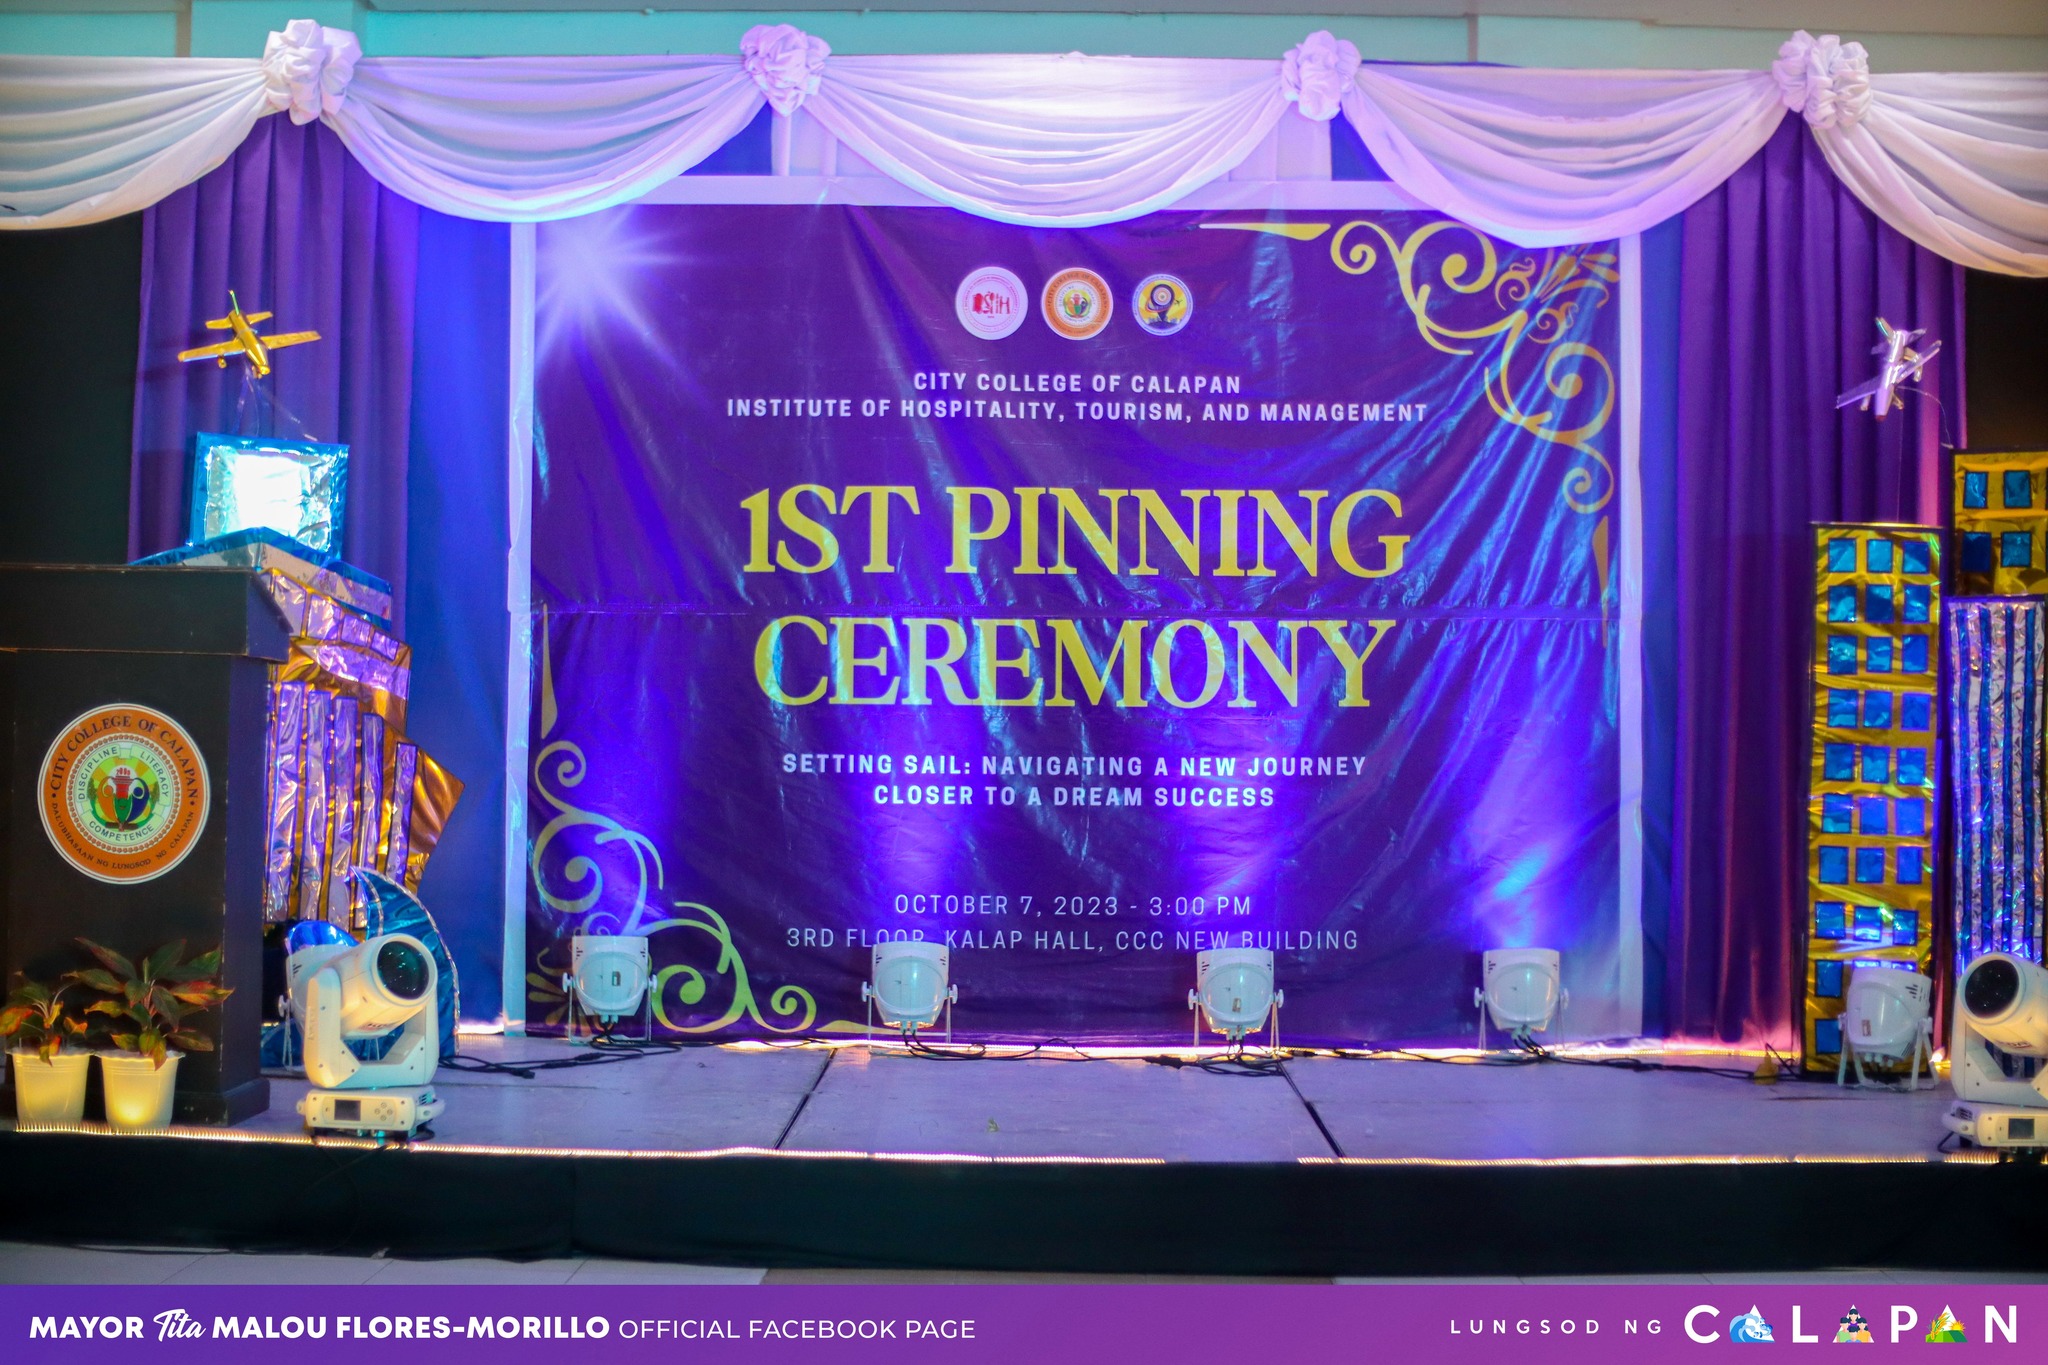 CCC Institute of Hospitality and Tourism Management 1st Pinning Ceremony